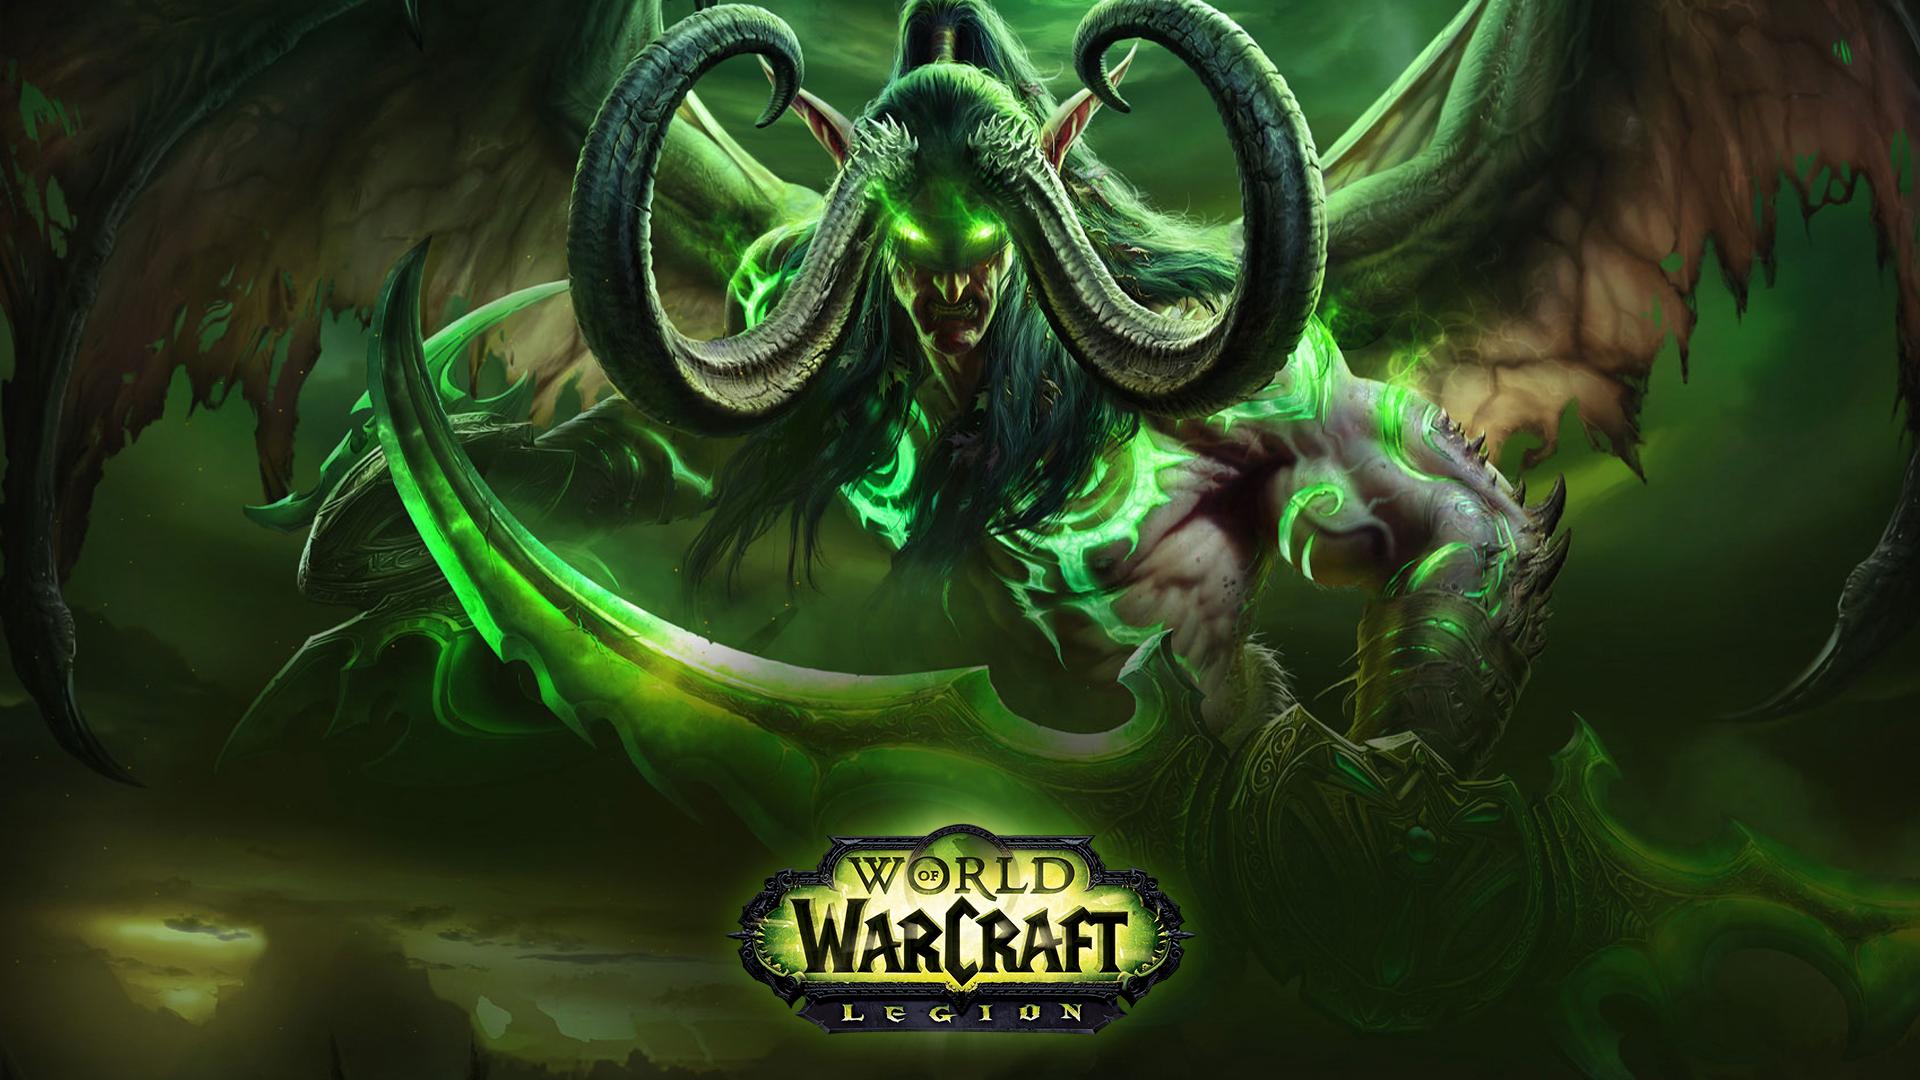 Does Anyone Have The Wow Legion Wallpaper Without Logo